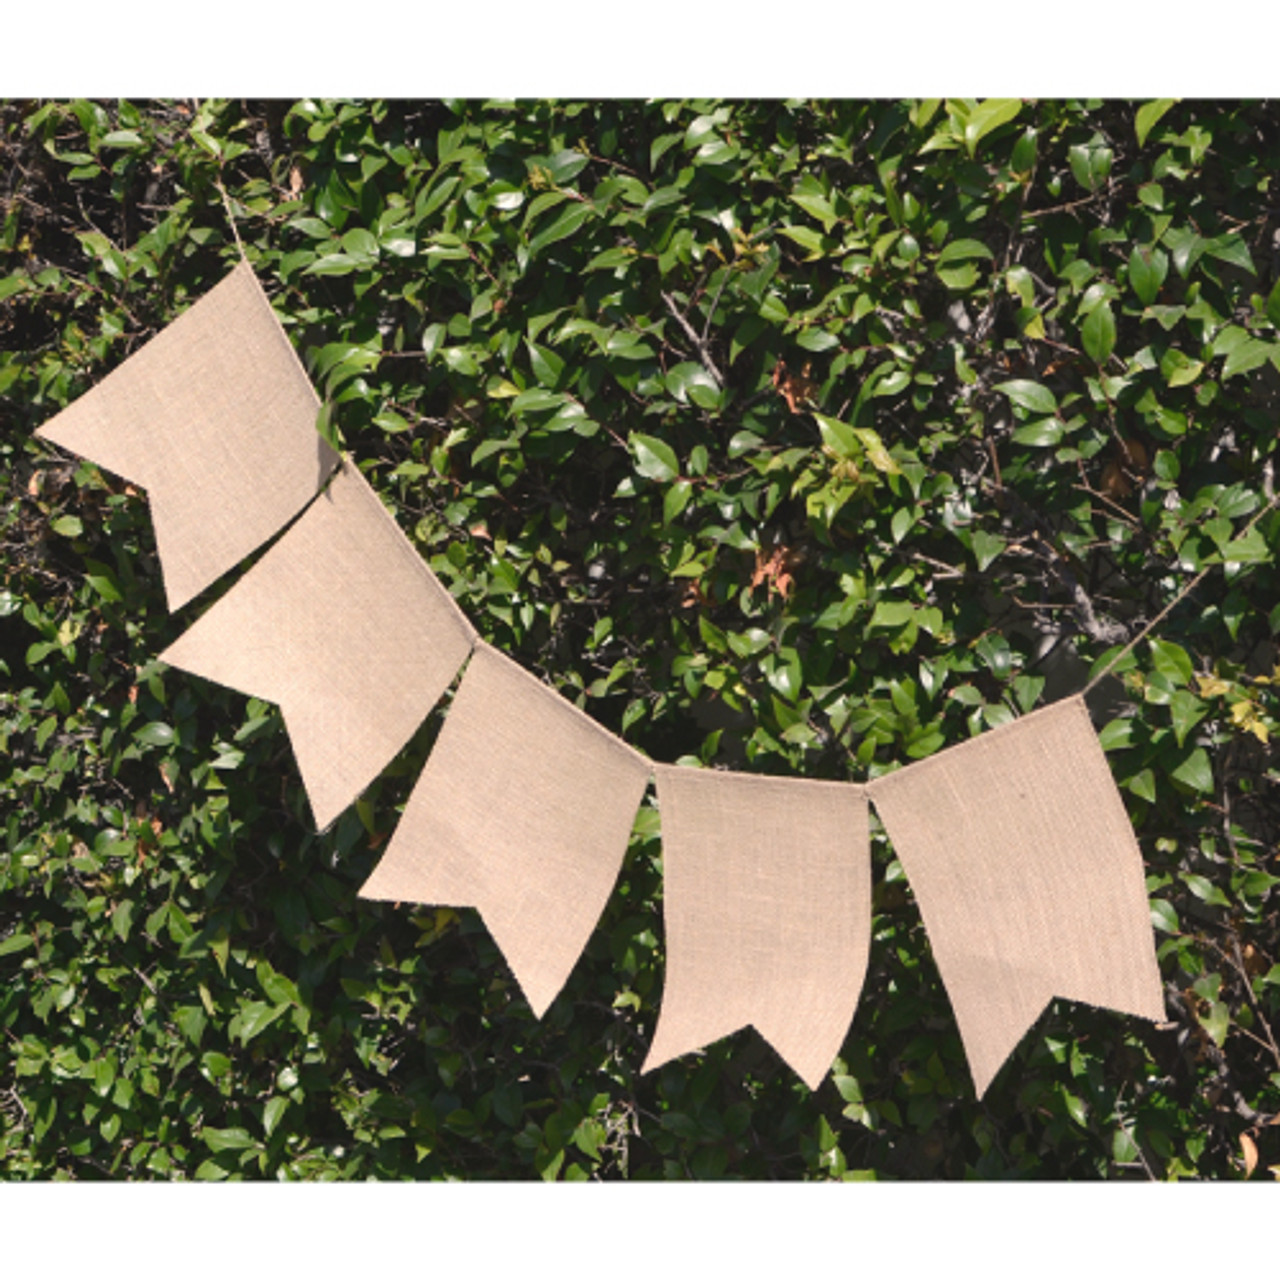 Natural Burlap Swallow Tail Pennant Banner with Jute Cord